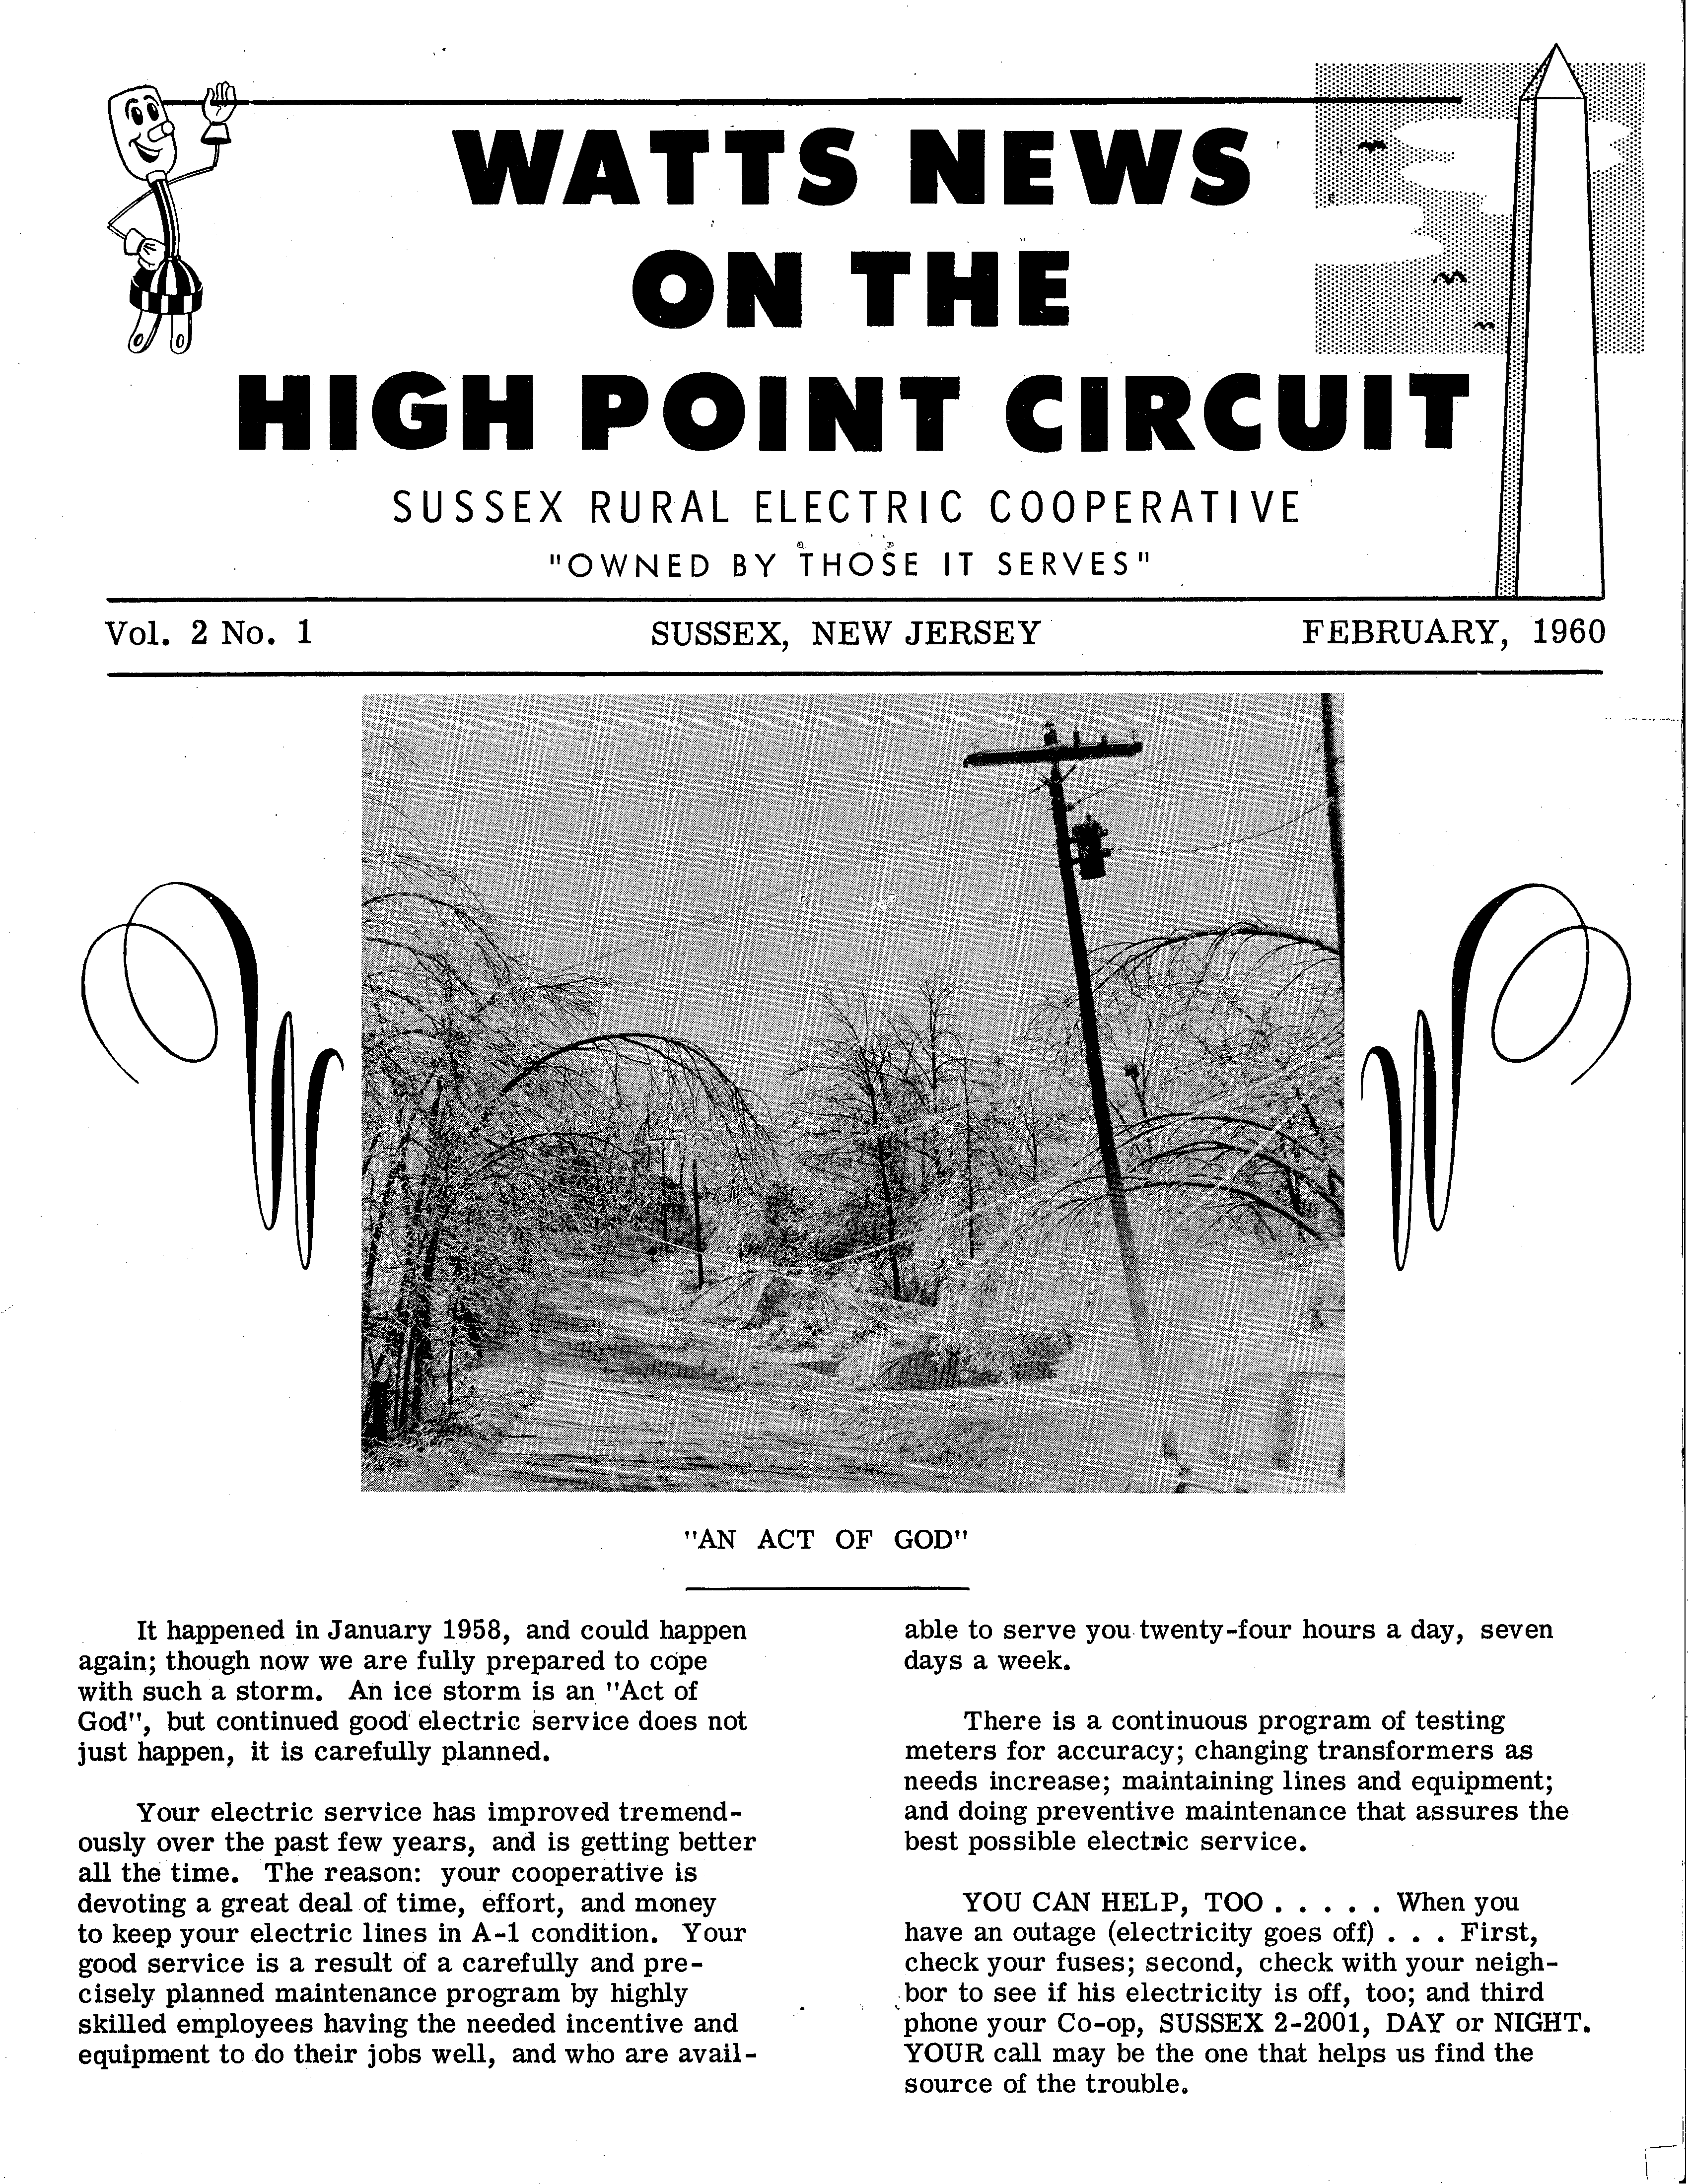 Pictured: The first page of a February, 1960 edition of “Watts New on the High Point Circuit,” Sussex Rural Electric Cooperative’s first member newsletter. Production of this newsletter began in mid-1959 and ended in the early 1960s. The header of this newsletter features a depiction of the High Point Monument and rural electric co-op mascot Willie Wiredhand.